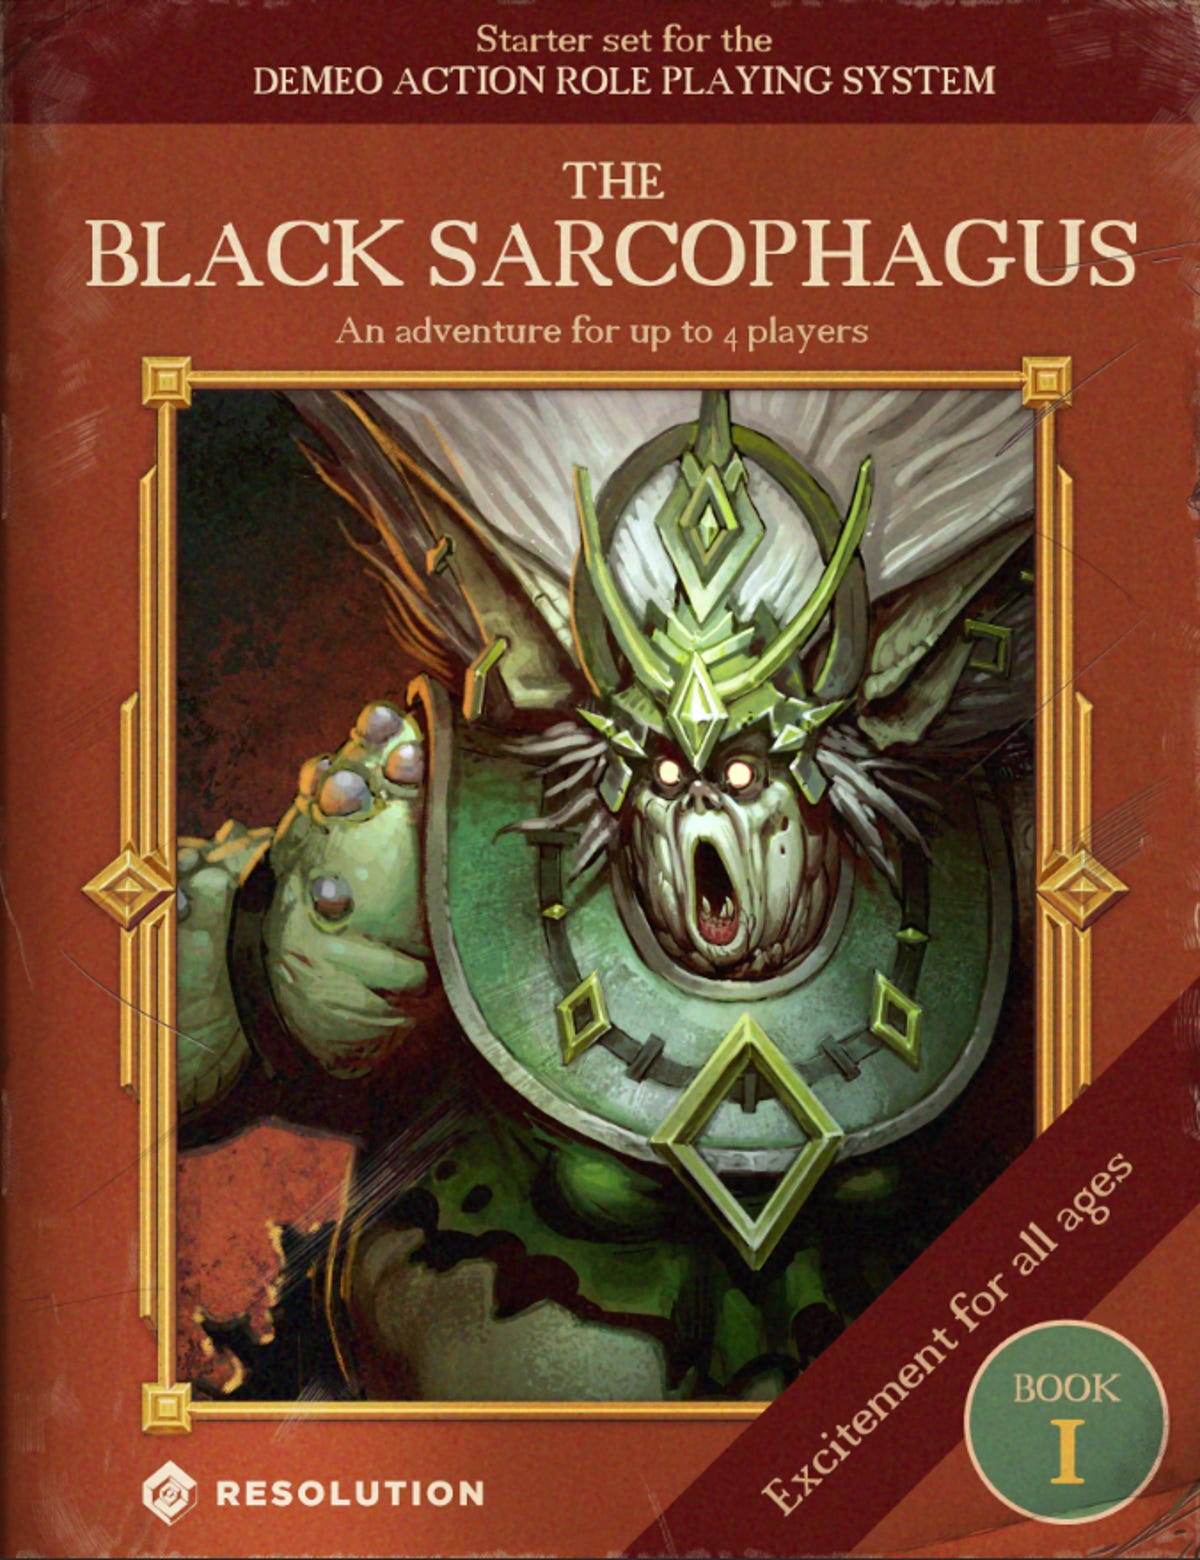 book-1-the-black-sarcophagus-image.png